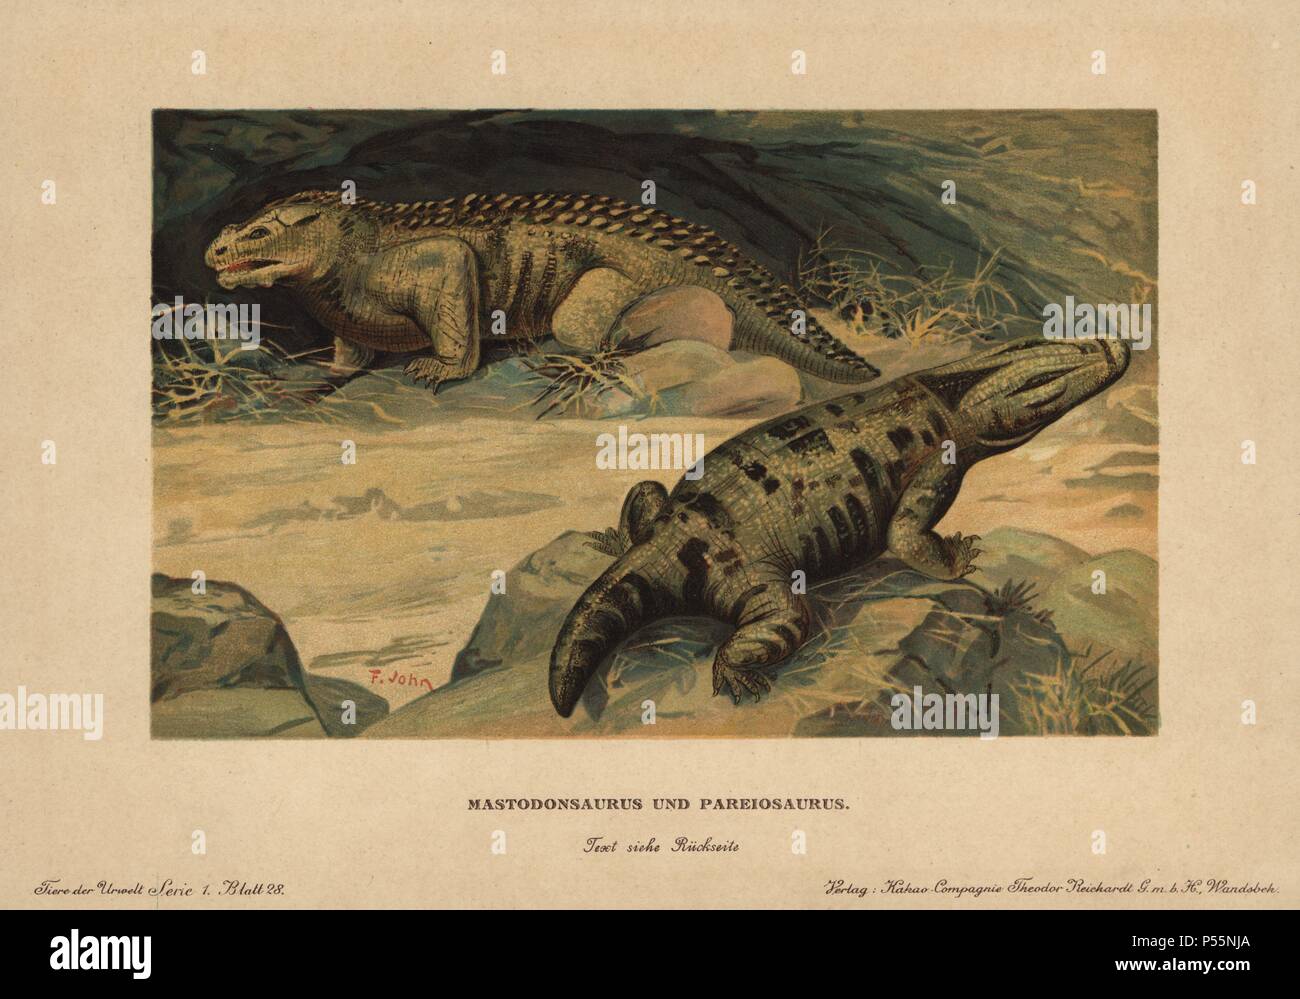 Mastodonsaurus, extinct genus of giant large-headed temnospondyl amphibians of the Triassic, and Pareiasaurus, extinct genus of anapsid reptile from the Permian. Colour printed (chromolithograph) illustration by F. John from 'Tiere der Urwelt' Animals of the Prehistoric World, 1910, Hamburg. From a series of prehistoric creature cards published by the Reichardt Cocoa company. Stock Photo